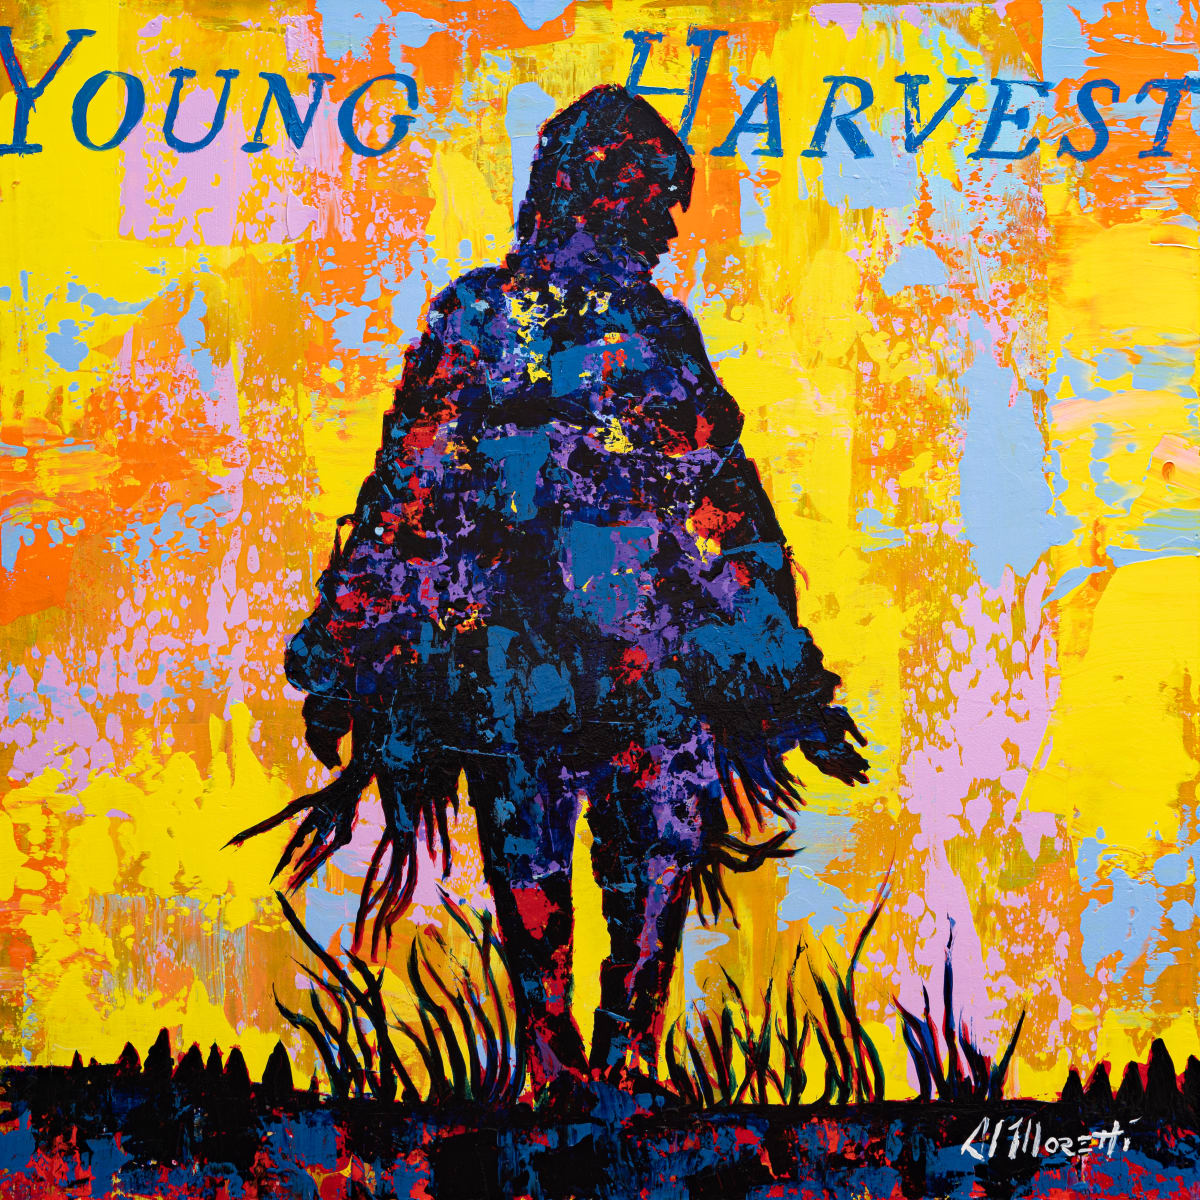 Neil Young, "Harvest Moon" by Al Moretti 